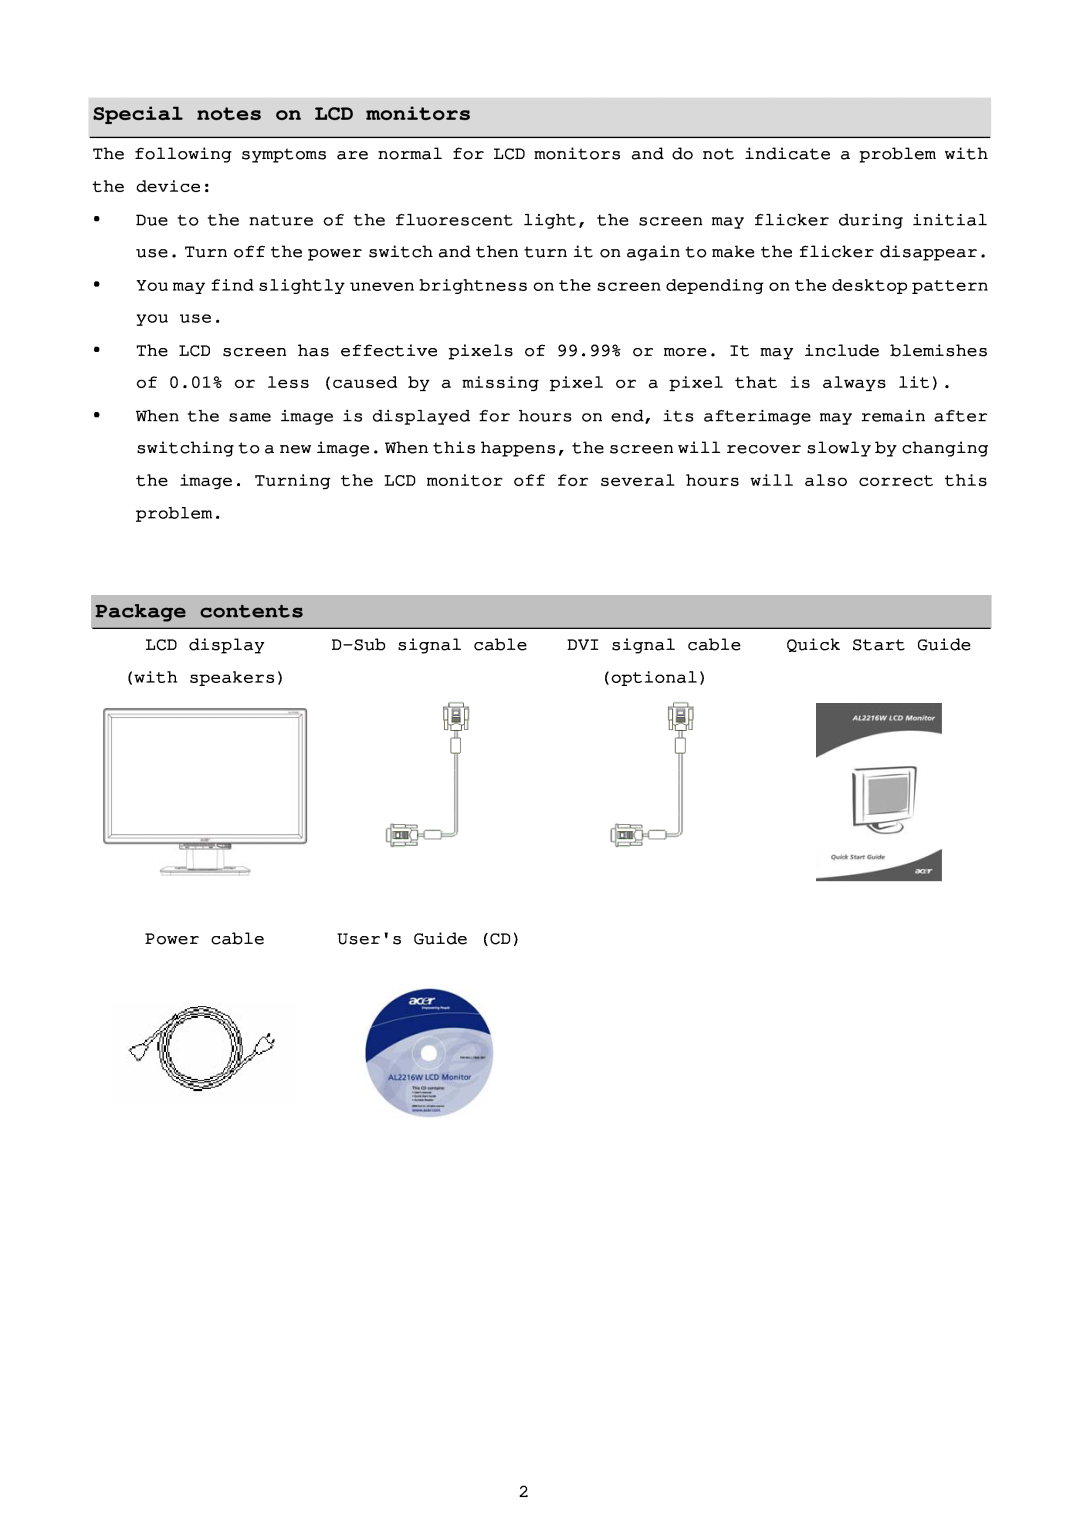 Acer AL2216W installation instructions Special notes on LCD monitors, Package contents 